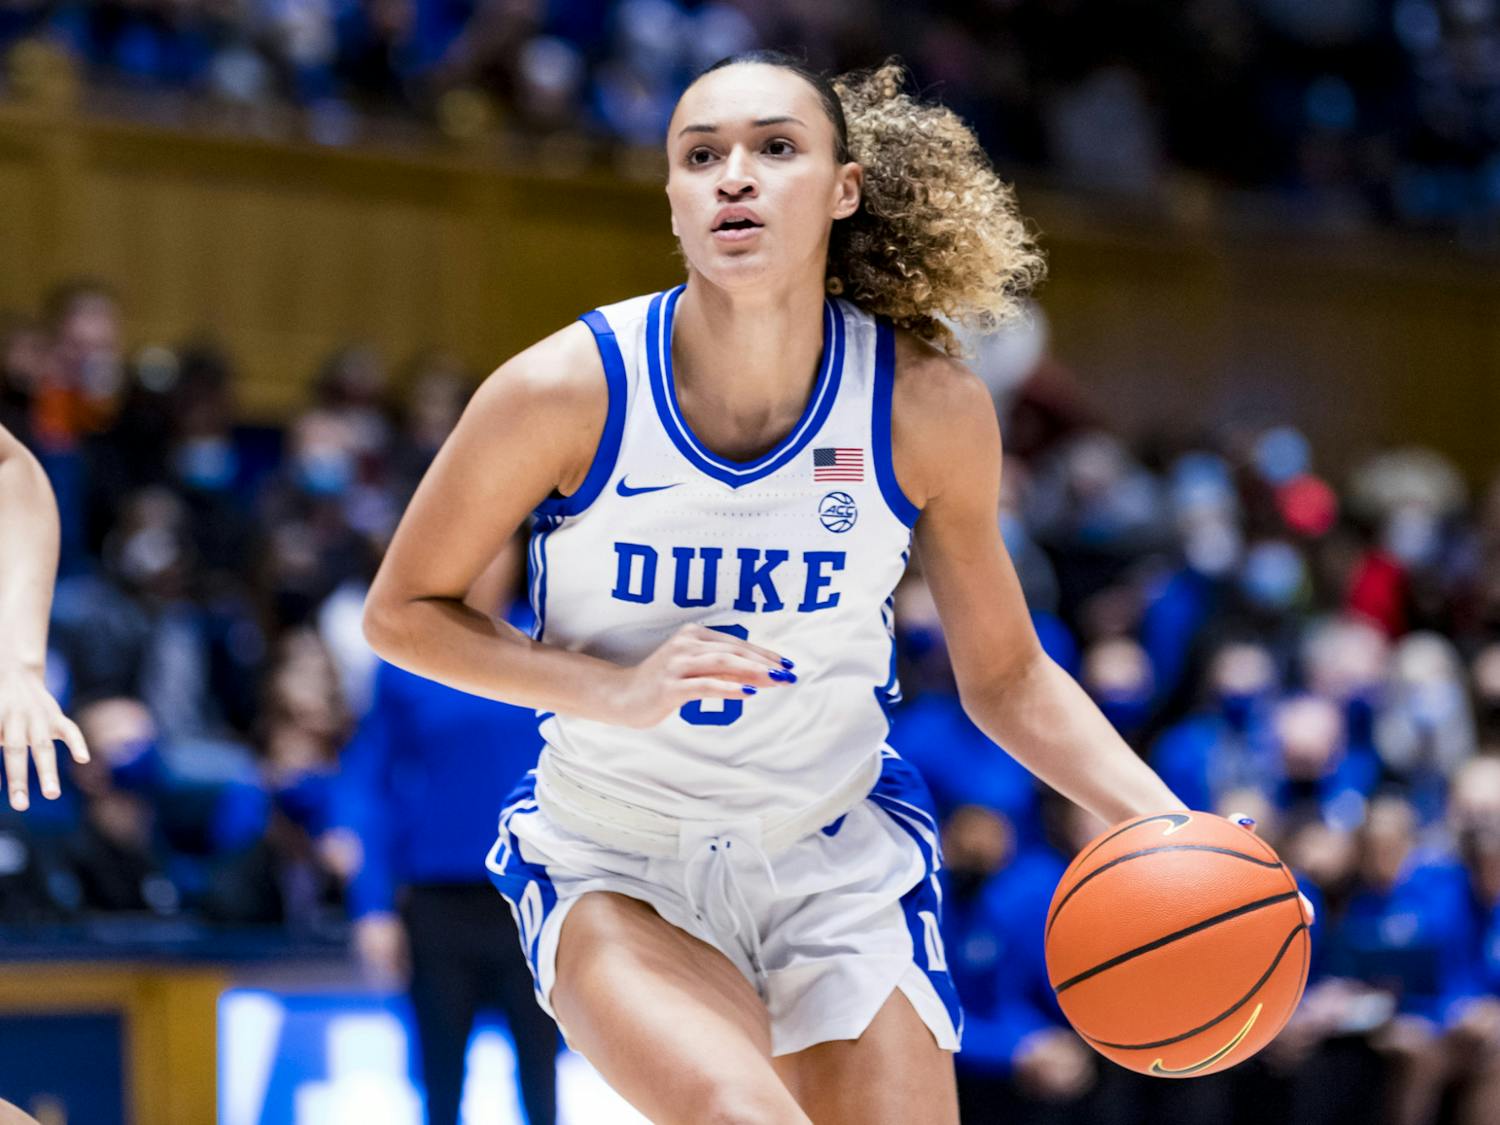 Celeste Taylor has not played since Duke's Jan. 9 game against Syracuse due to an upper body injury she suffered during that contest. 